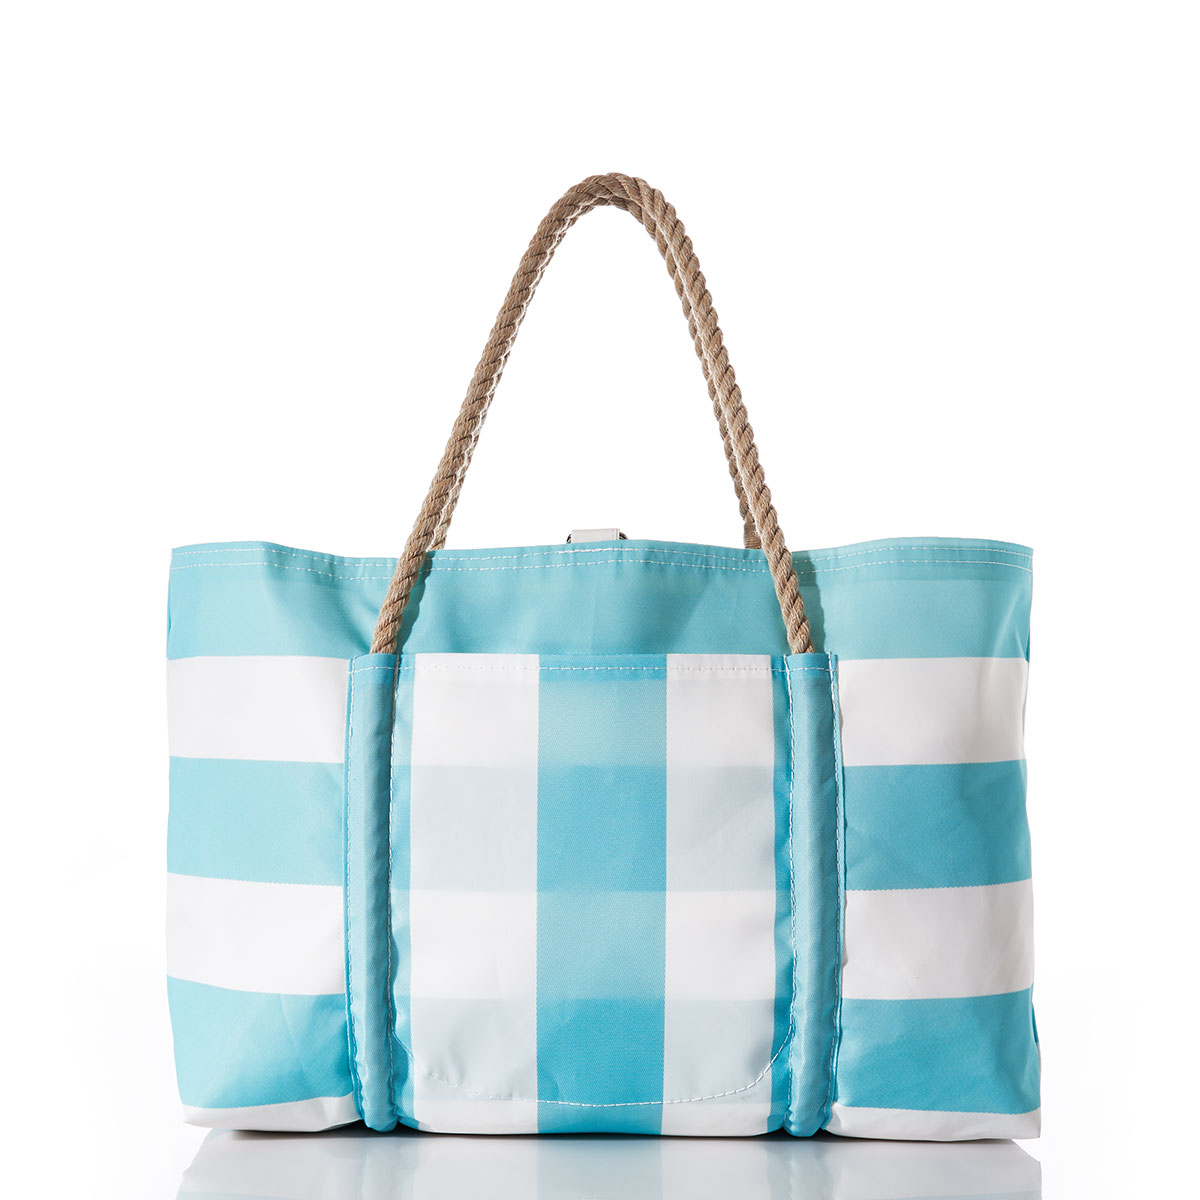 back view: aquamarine and white plaid stripes adorn the front of a recycled sail cloth tote with hemp rope handles and a top metal clasp